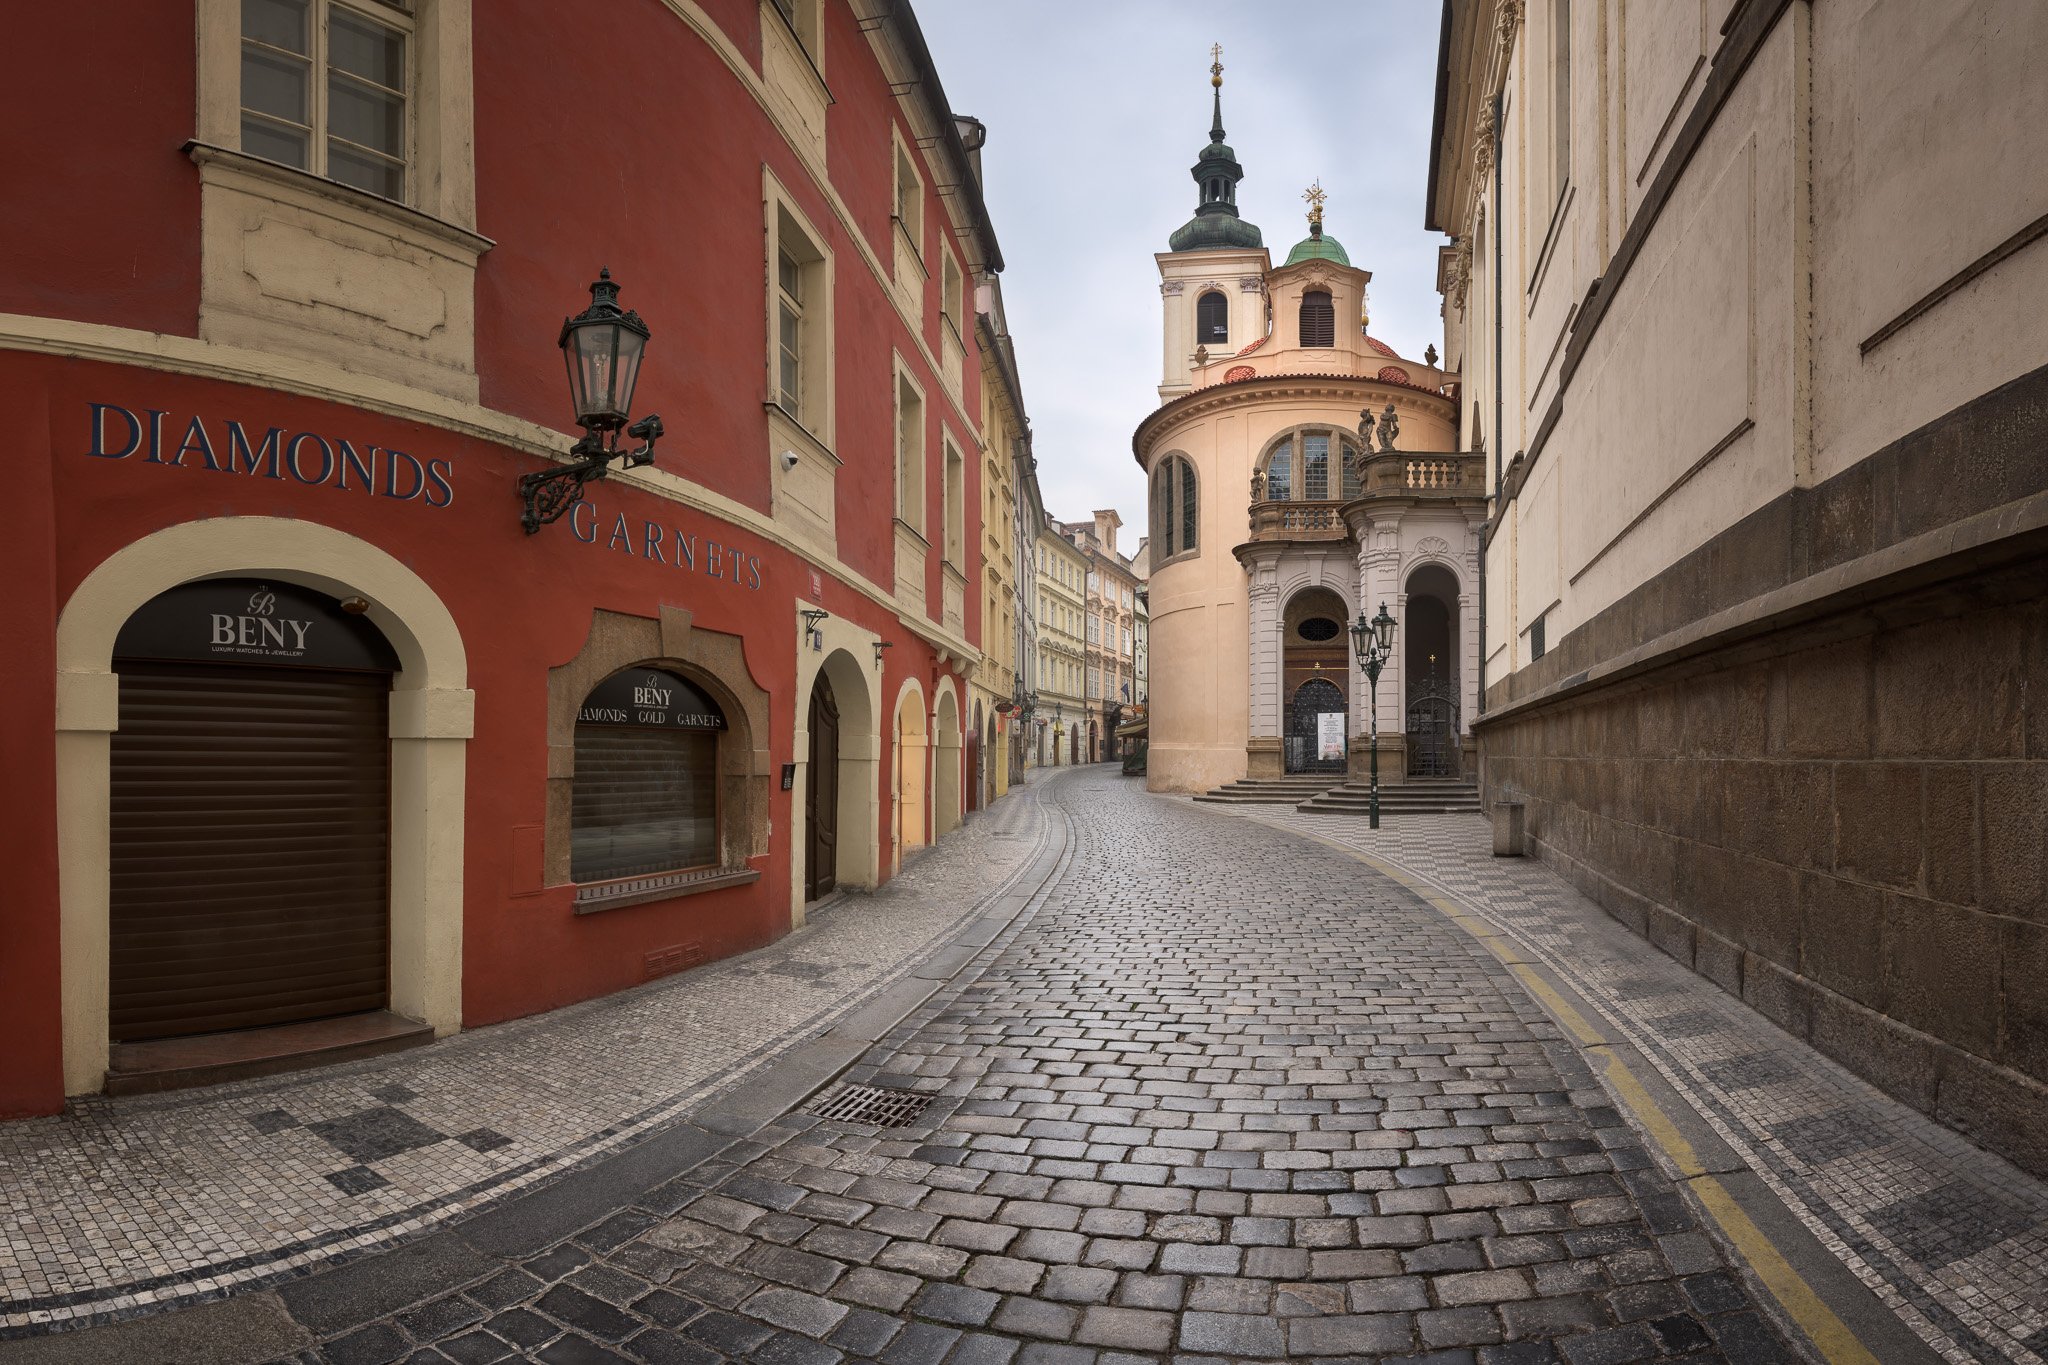 Panorama-of-Karlova-Street-and-Church-of-Assumption-of-Mary-in-the-Morning-Prague-Czech-Republic.jpg